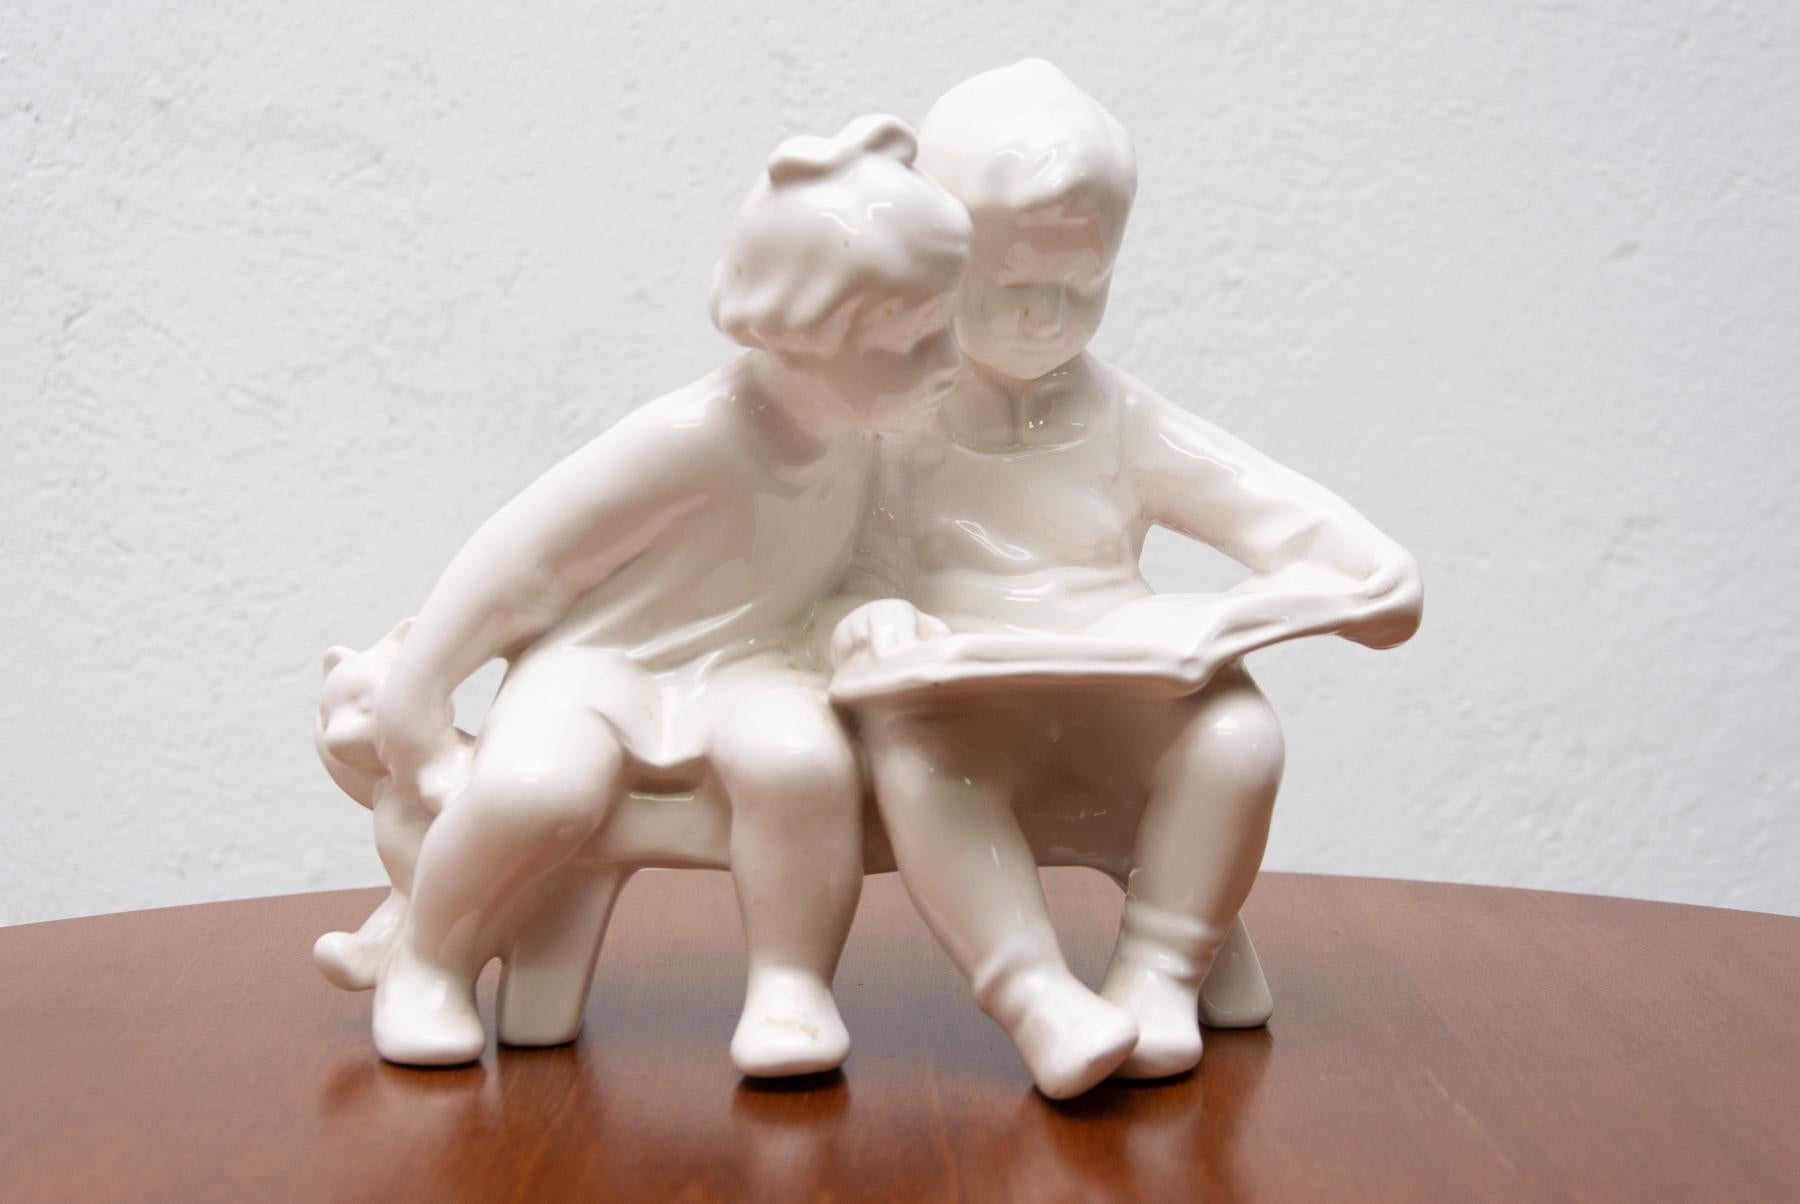 Ceramic sculpture children with a book, made by Keramia Znojmo company in the former Czechoslovakia in the 1950s. The sculpture is made of ceramics.
The statuette is in very good vintage condition.